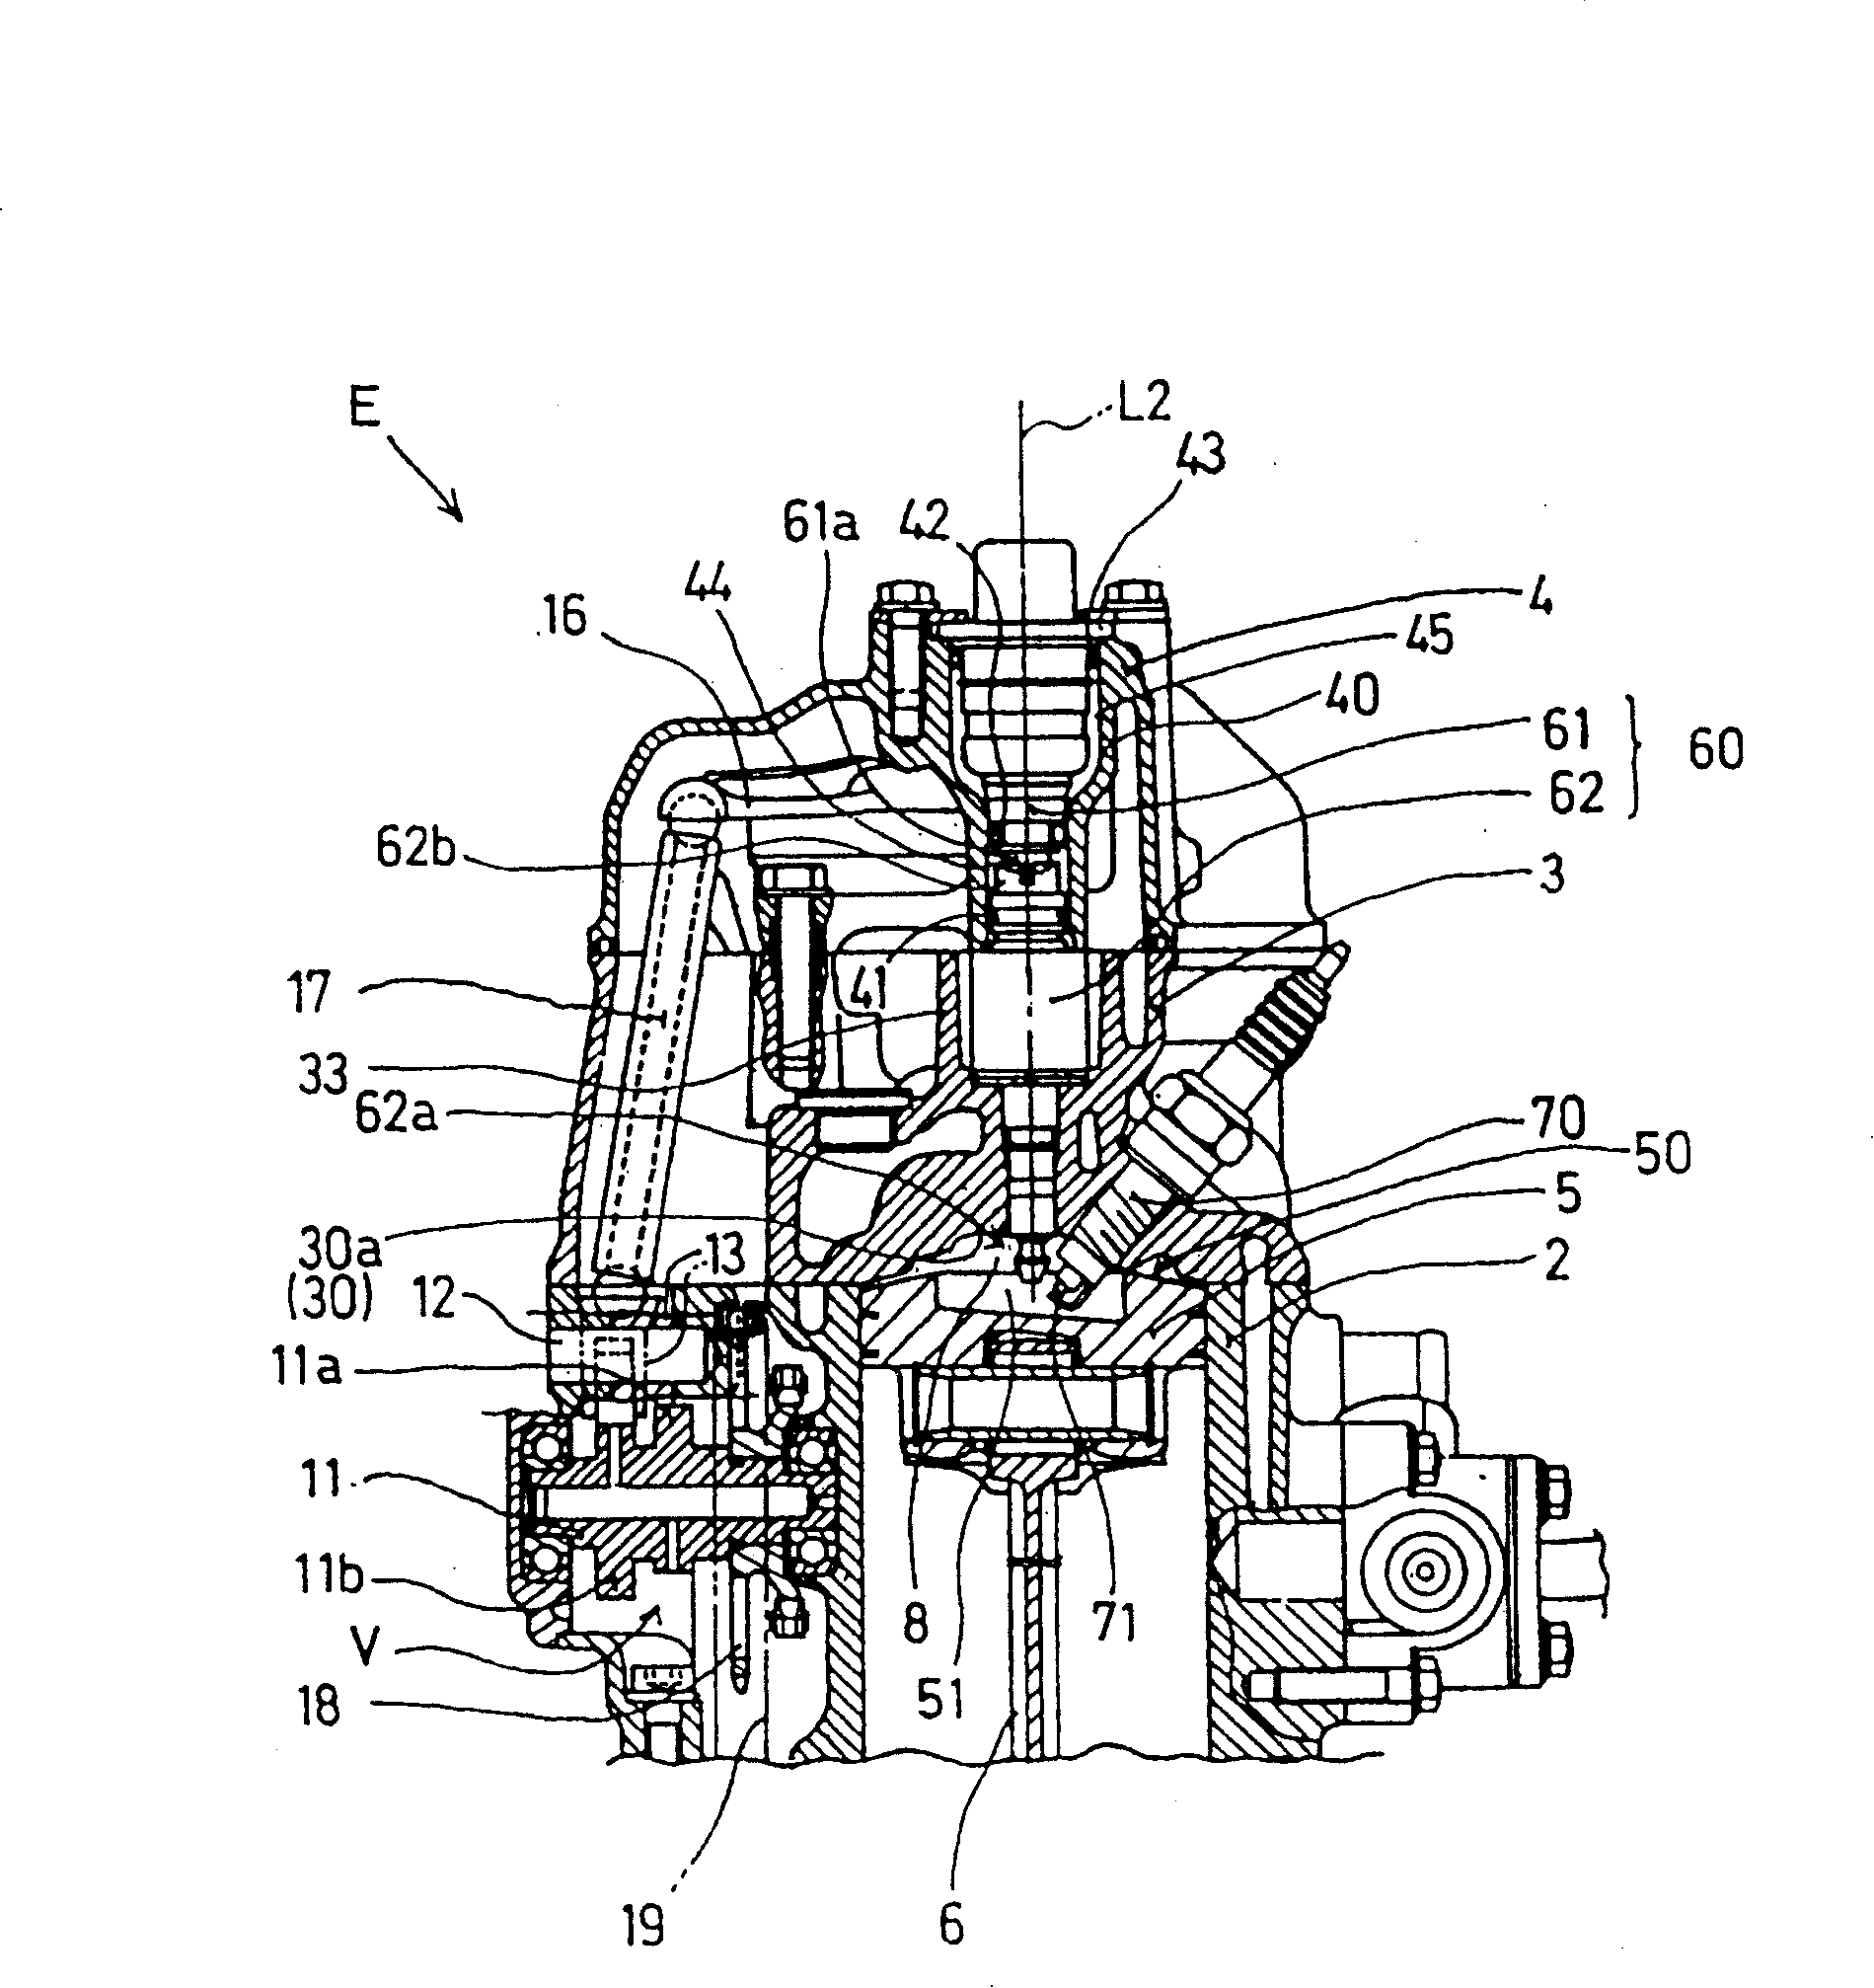 Fuel-direct-jetting type internal combustion engine